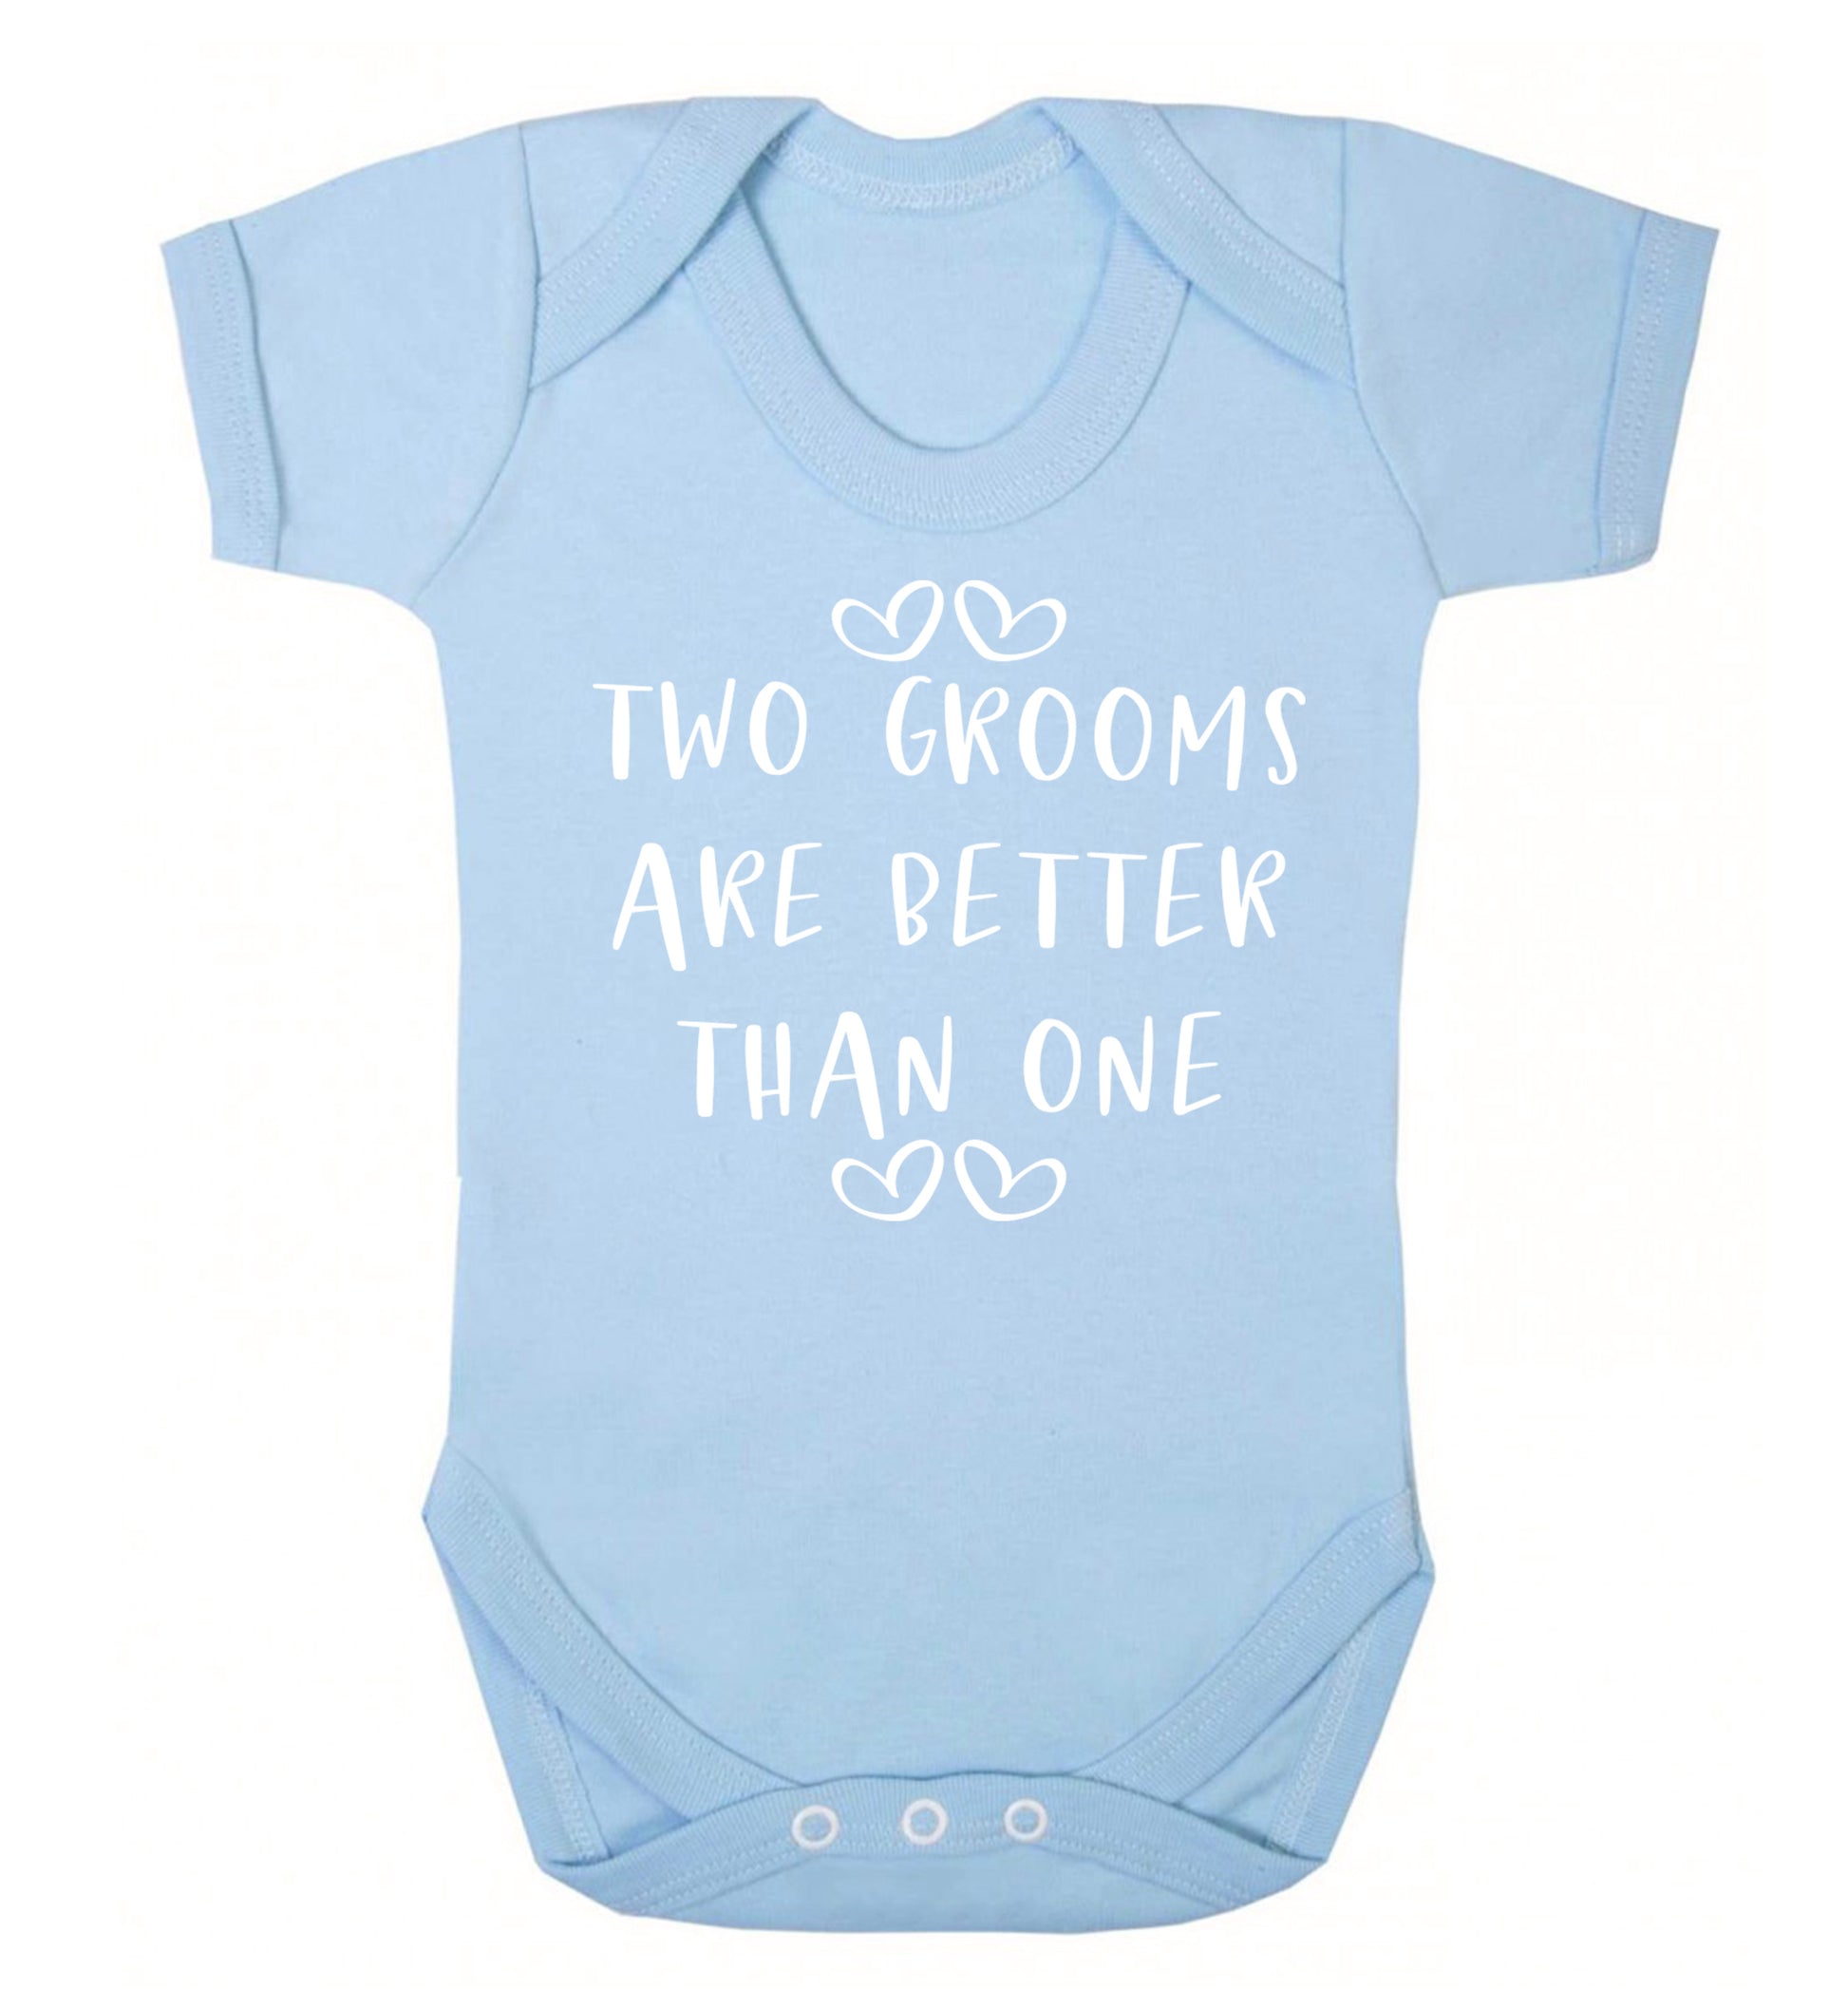 Two grooms are better than one baby vest pale blue 18-24 months